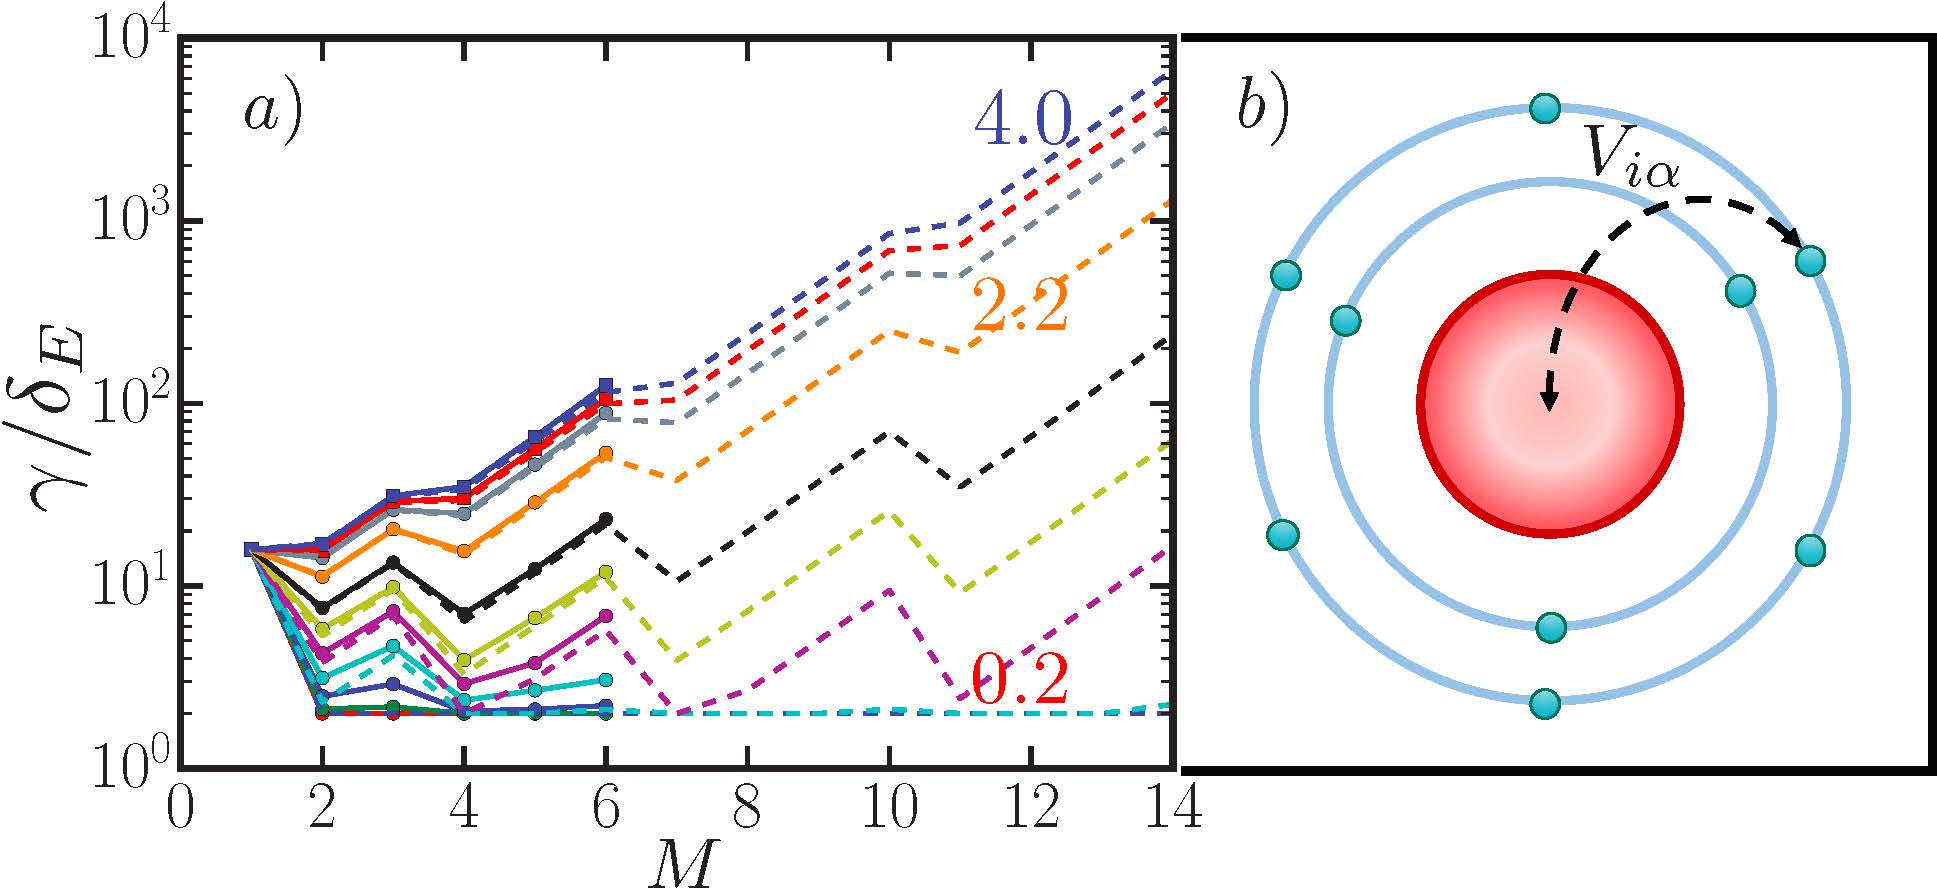 Stability of the many-body localized state